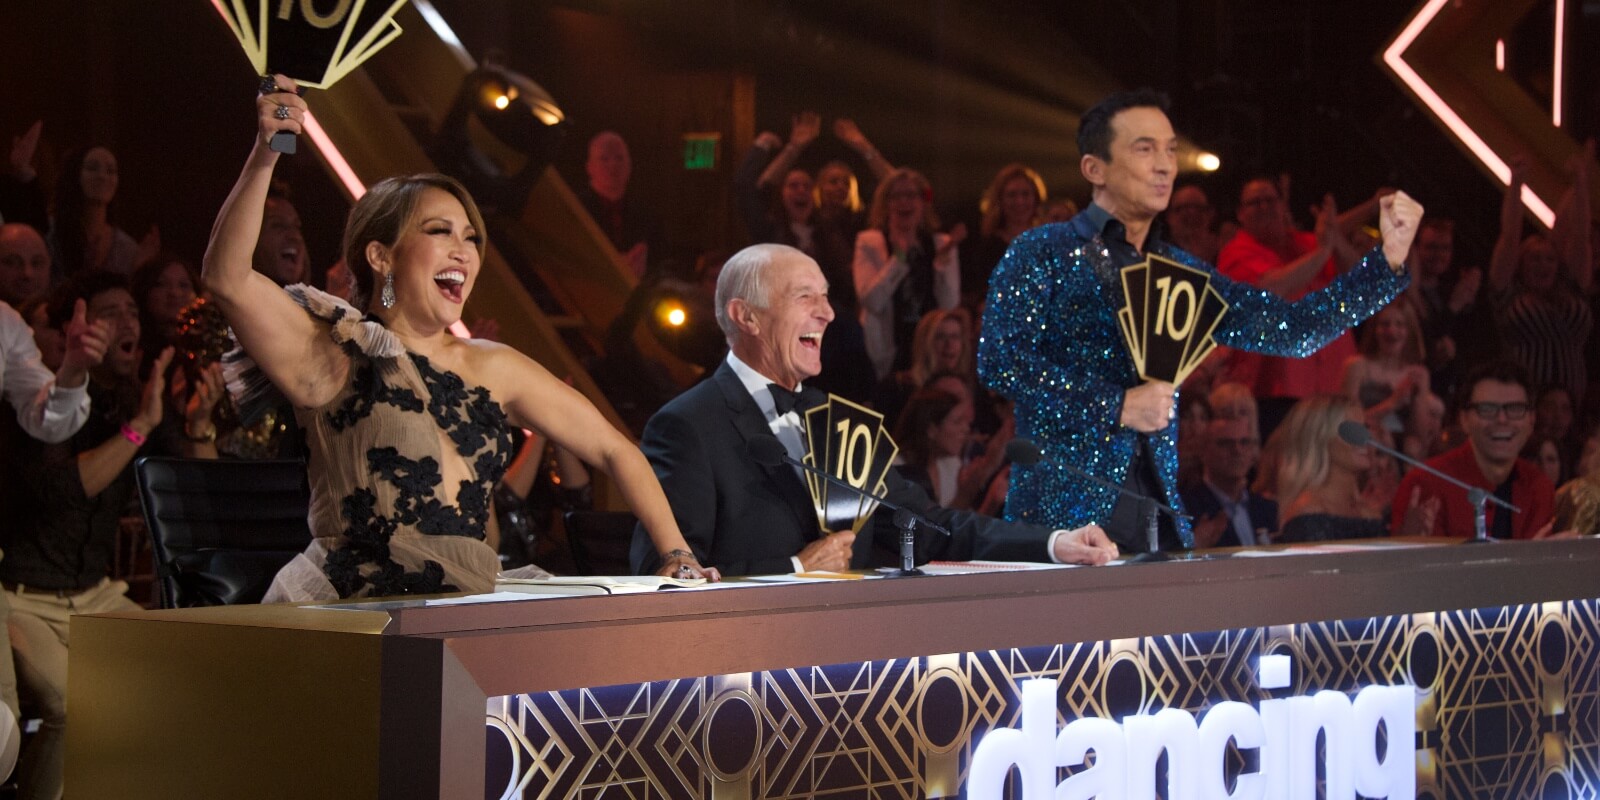 'Dancing with the Stars' Carrie Ann Inaba and Bruno Tonioli react to news of Len Goodman's death.